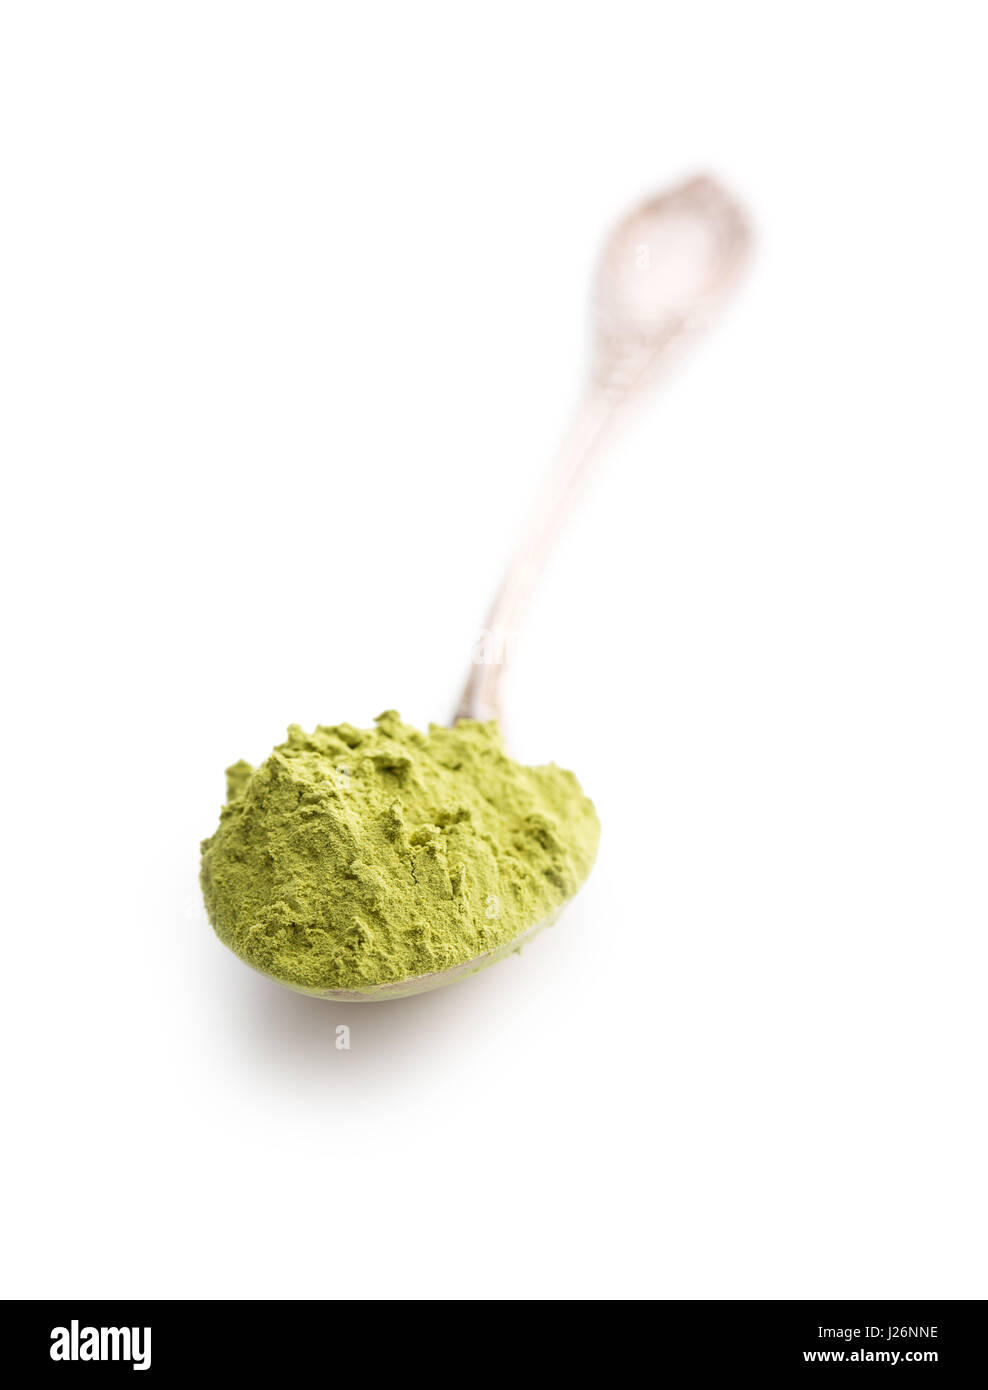 Green matcha tea powder in spoon isolated on white background. Stock Photo